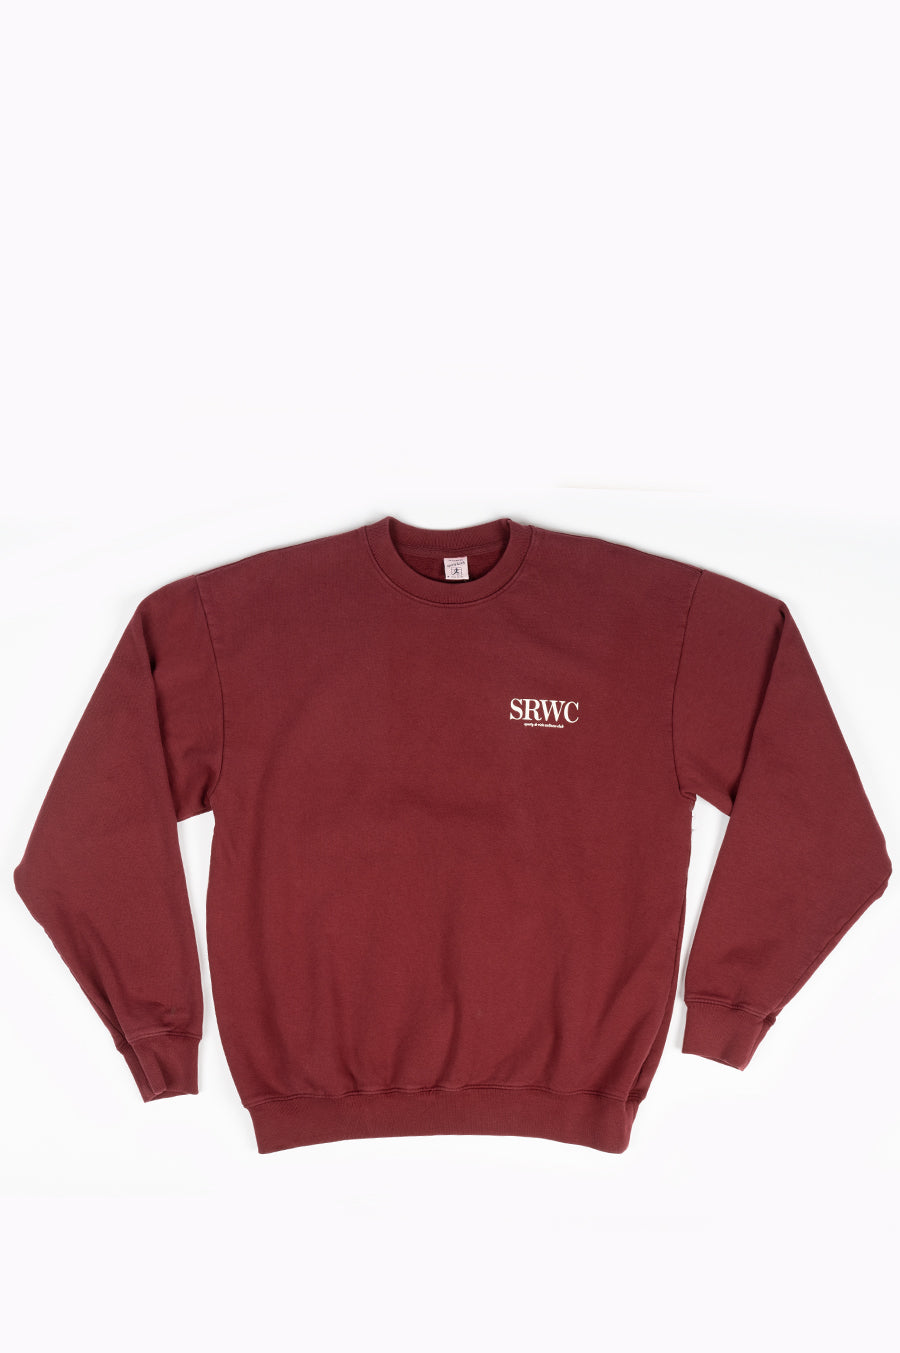 SPORTY AND RICH UPPER EAST SIDE CREWNECK MERLOT